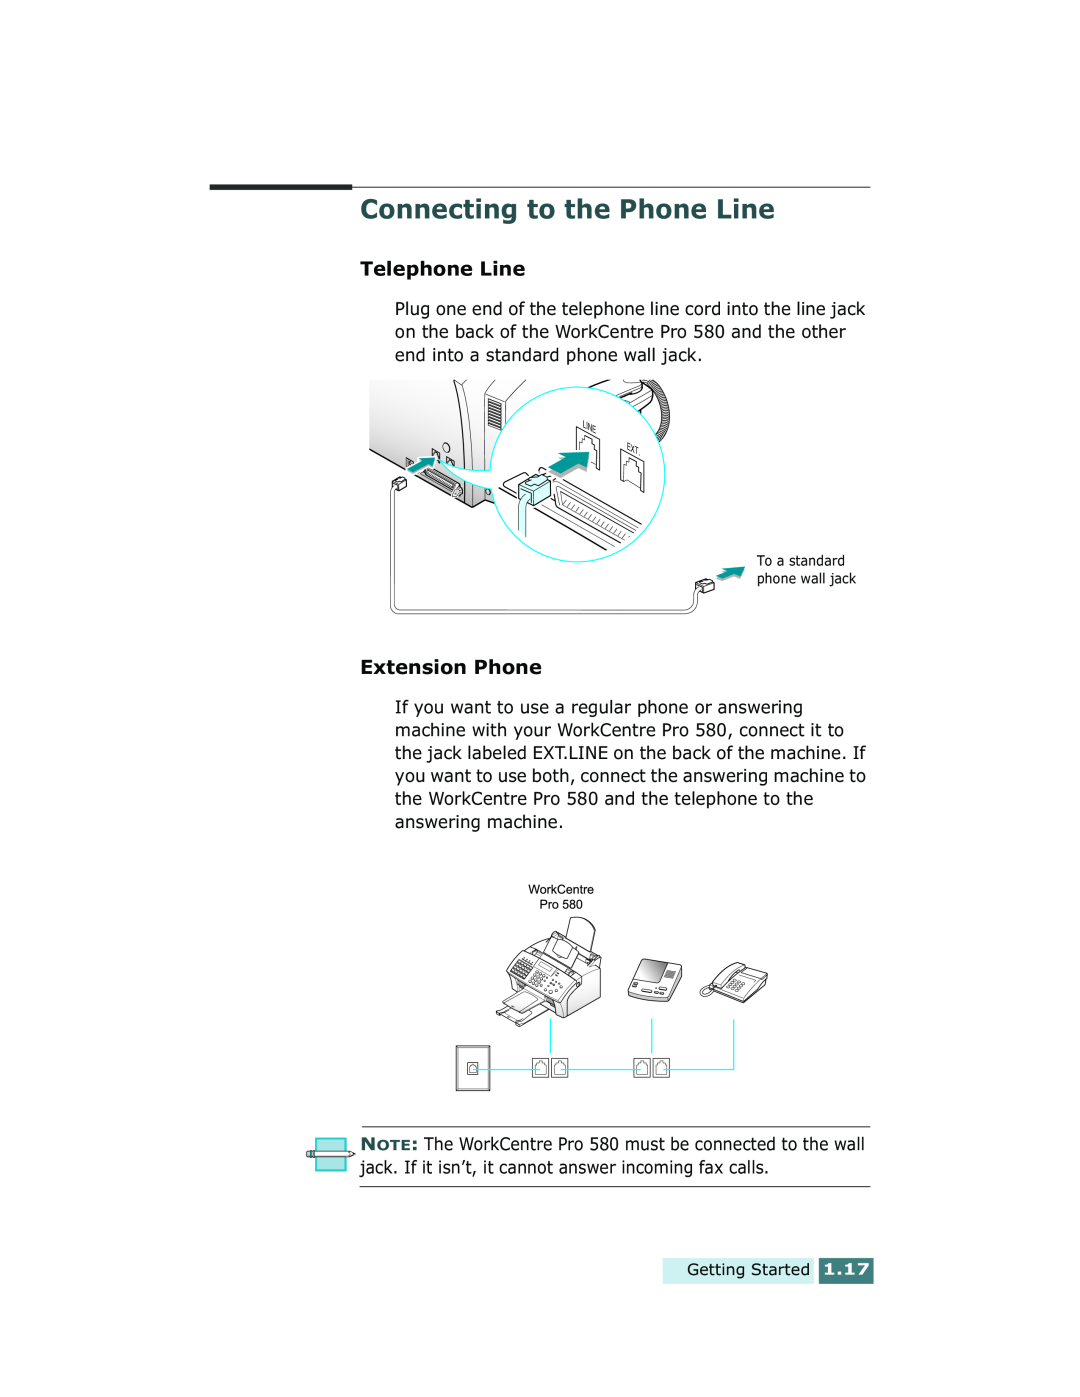 Xerox Pro 580 manual Connecting to the Phone Line, Telephone Line, Extension Phone 